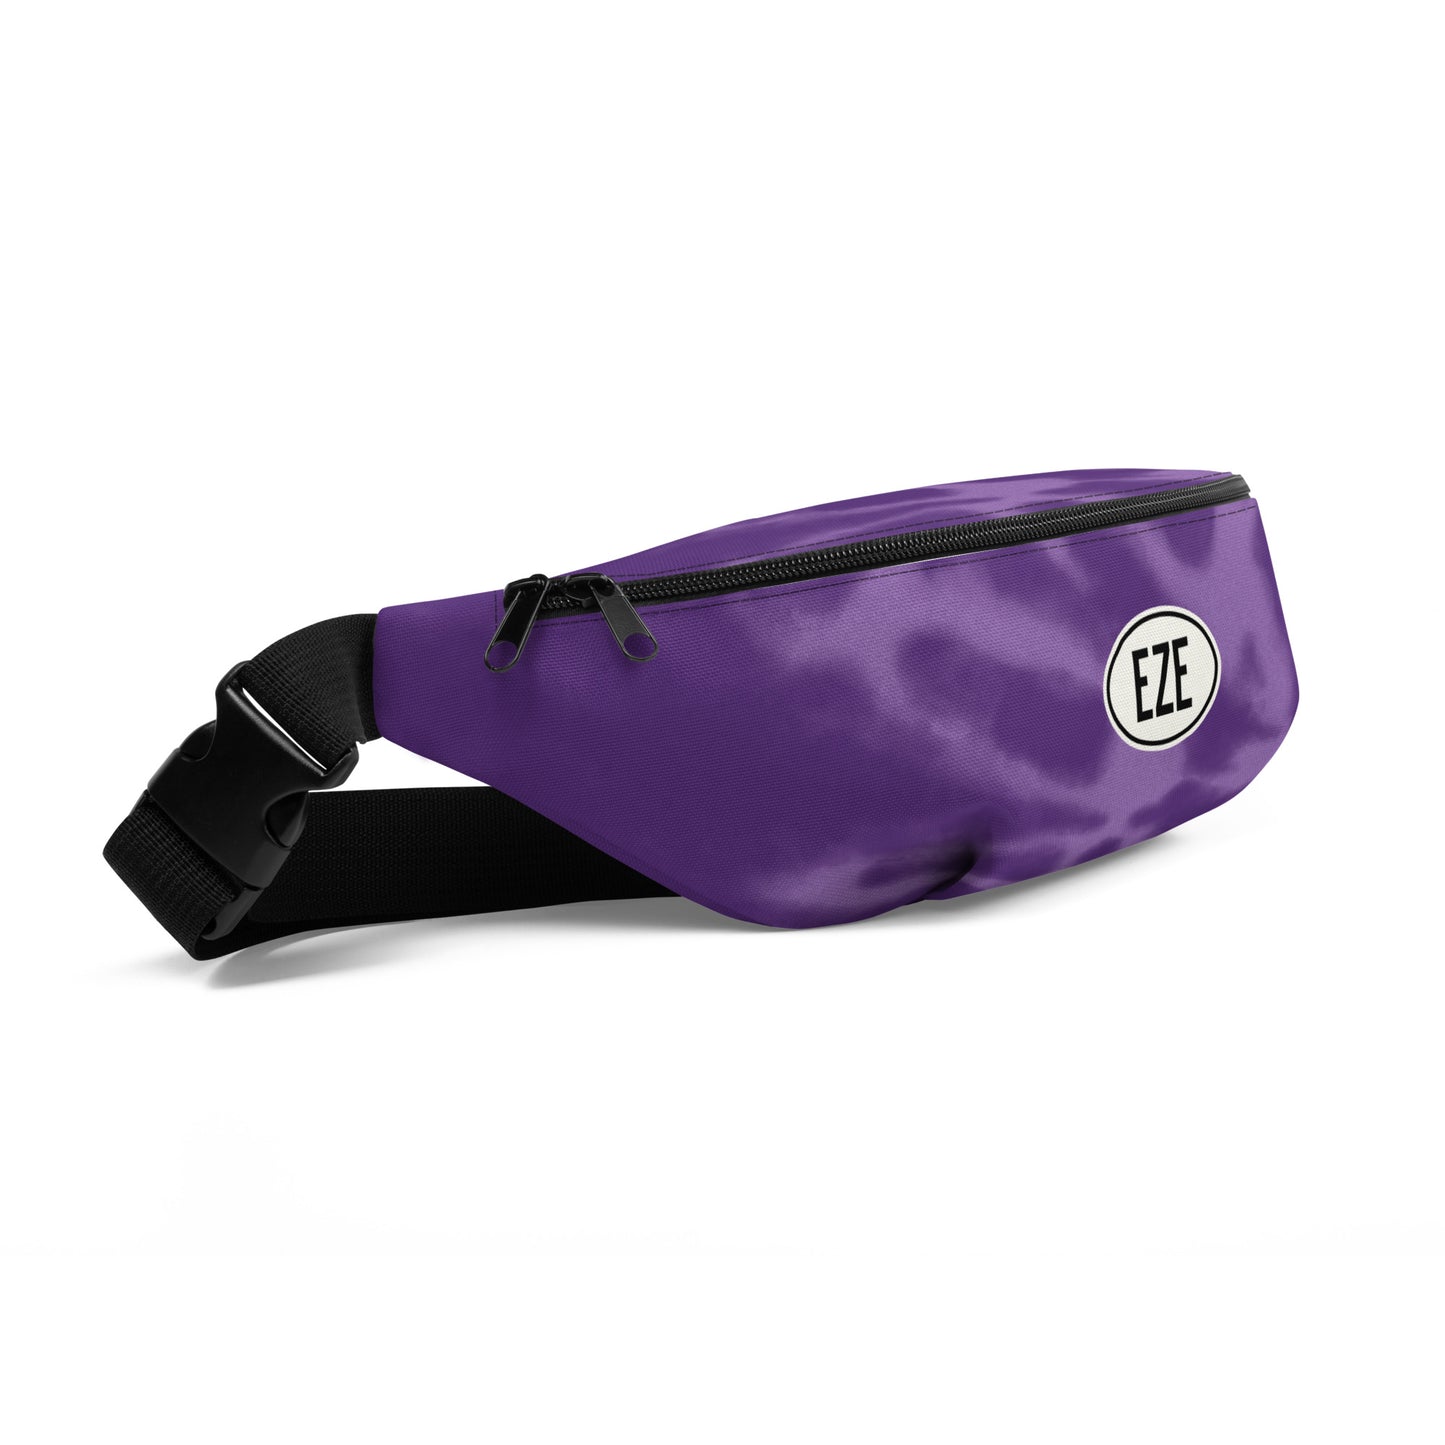 Travel Gift Fanny Pack - Purple Tie-Dye • EZE Buenos Aires • YHM Designs - Image 07